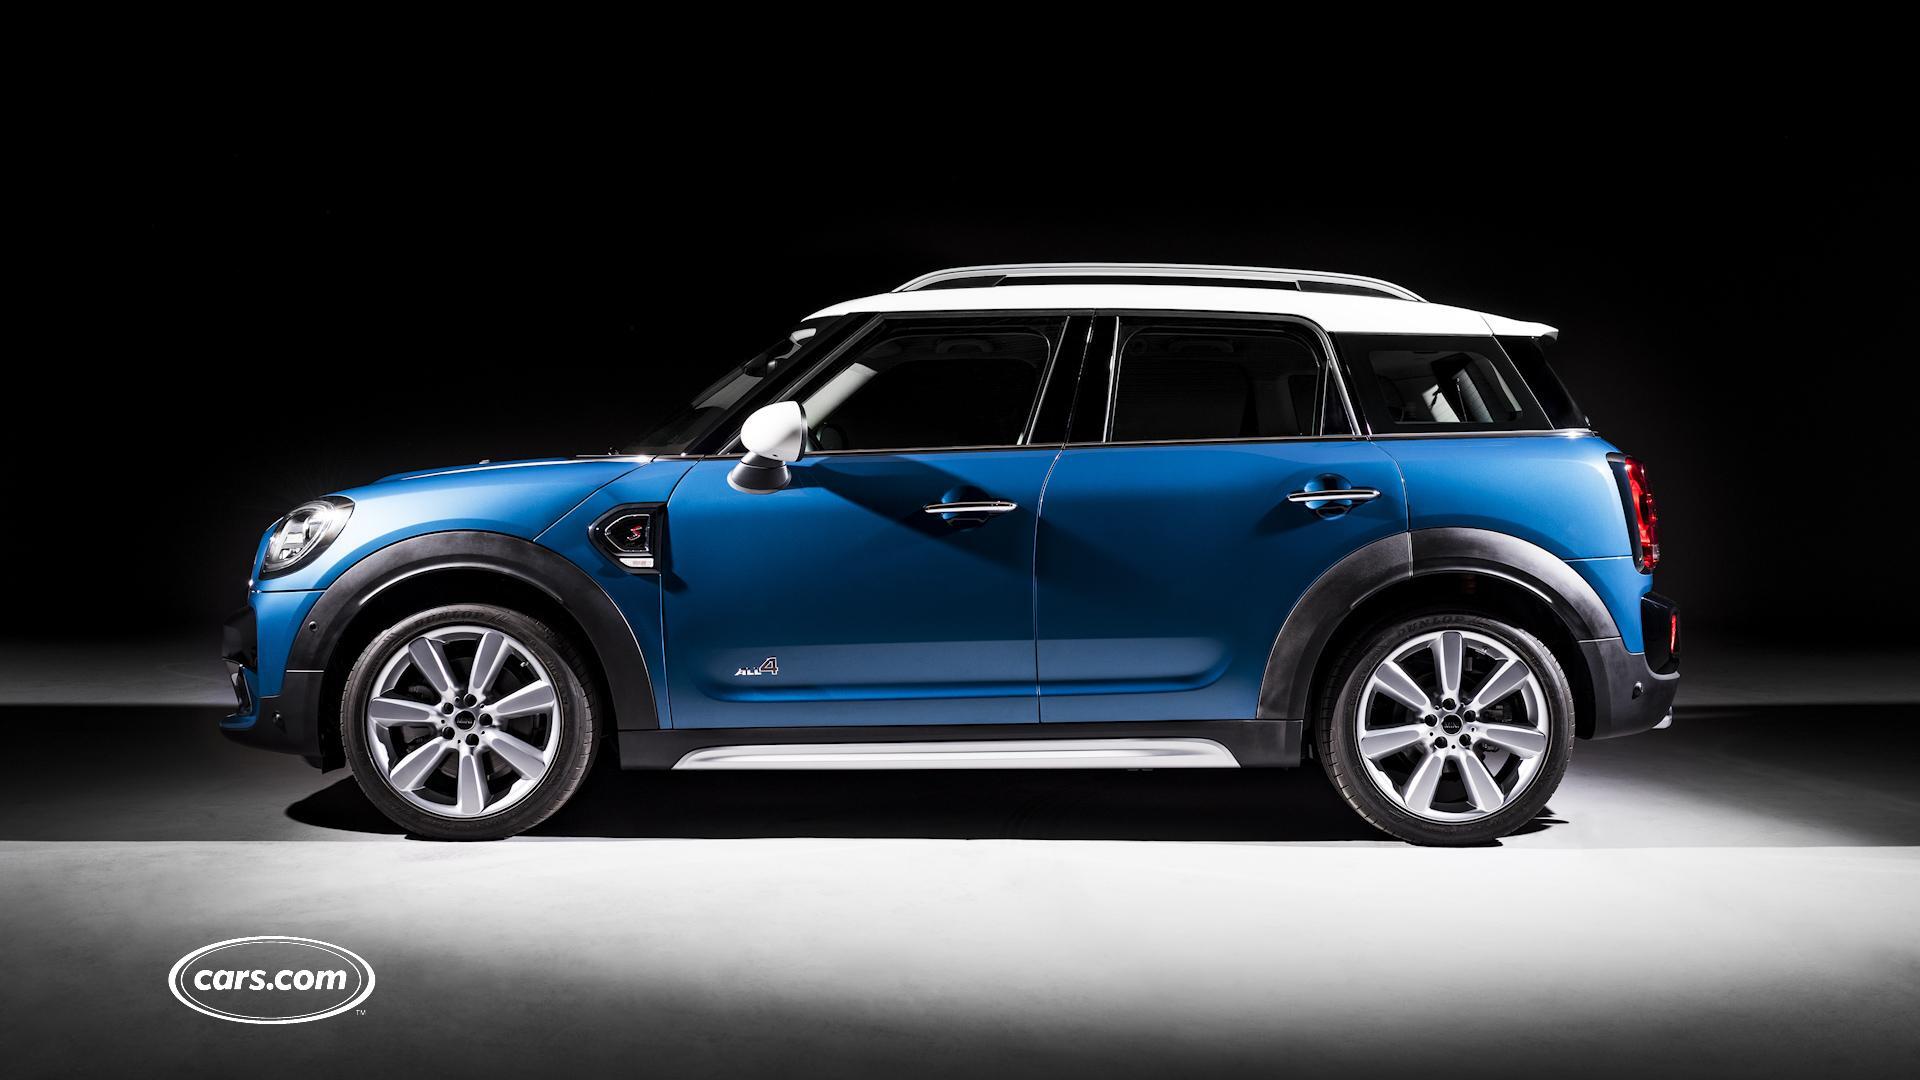 2025 MINI Countryman Technical Data Including Weight, Power